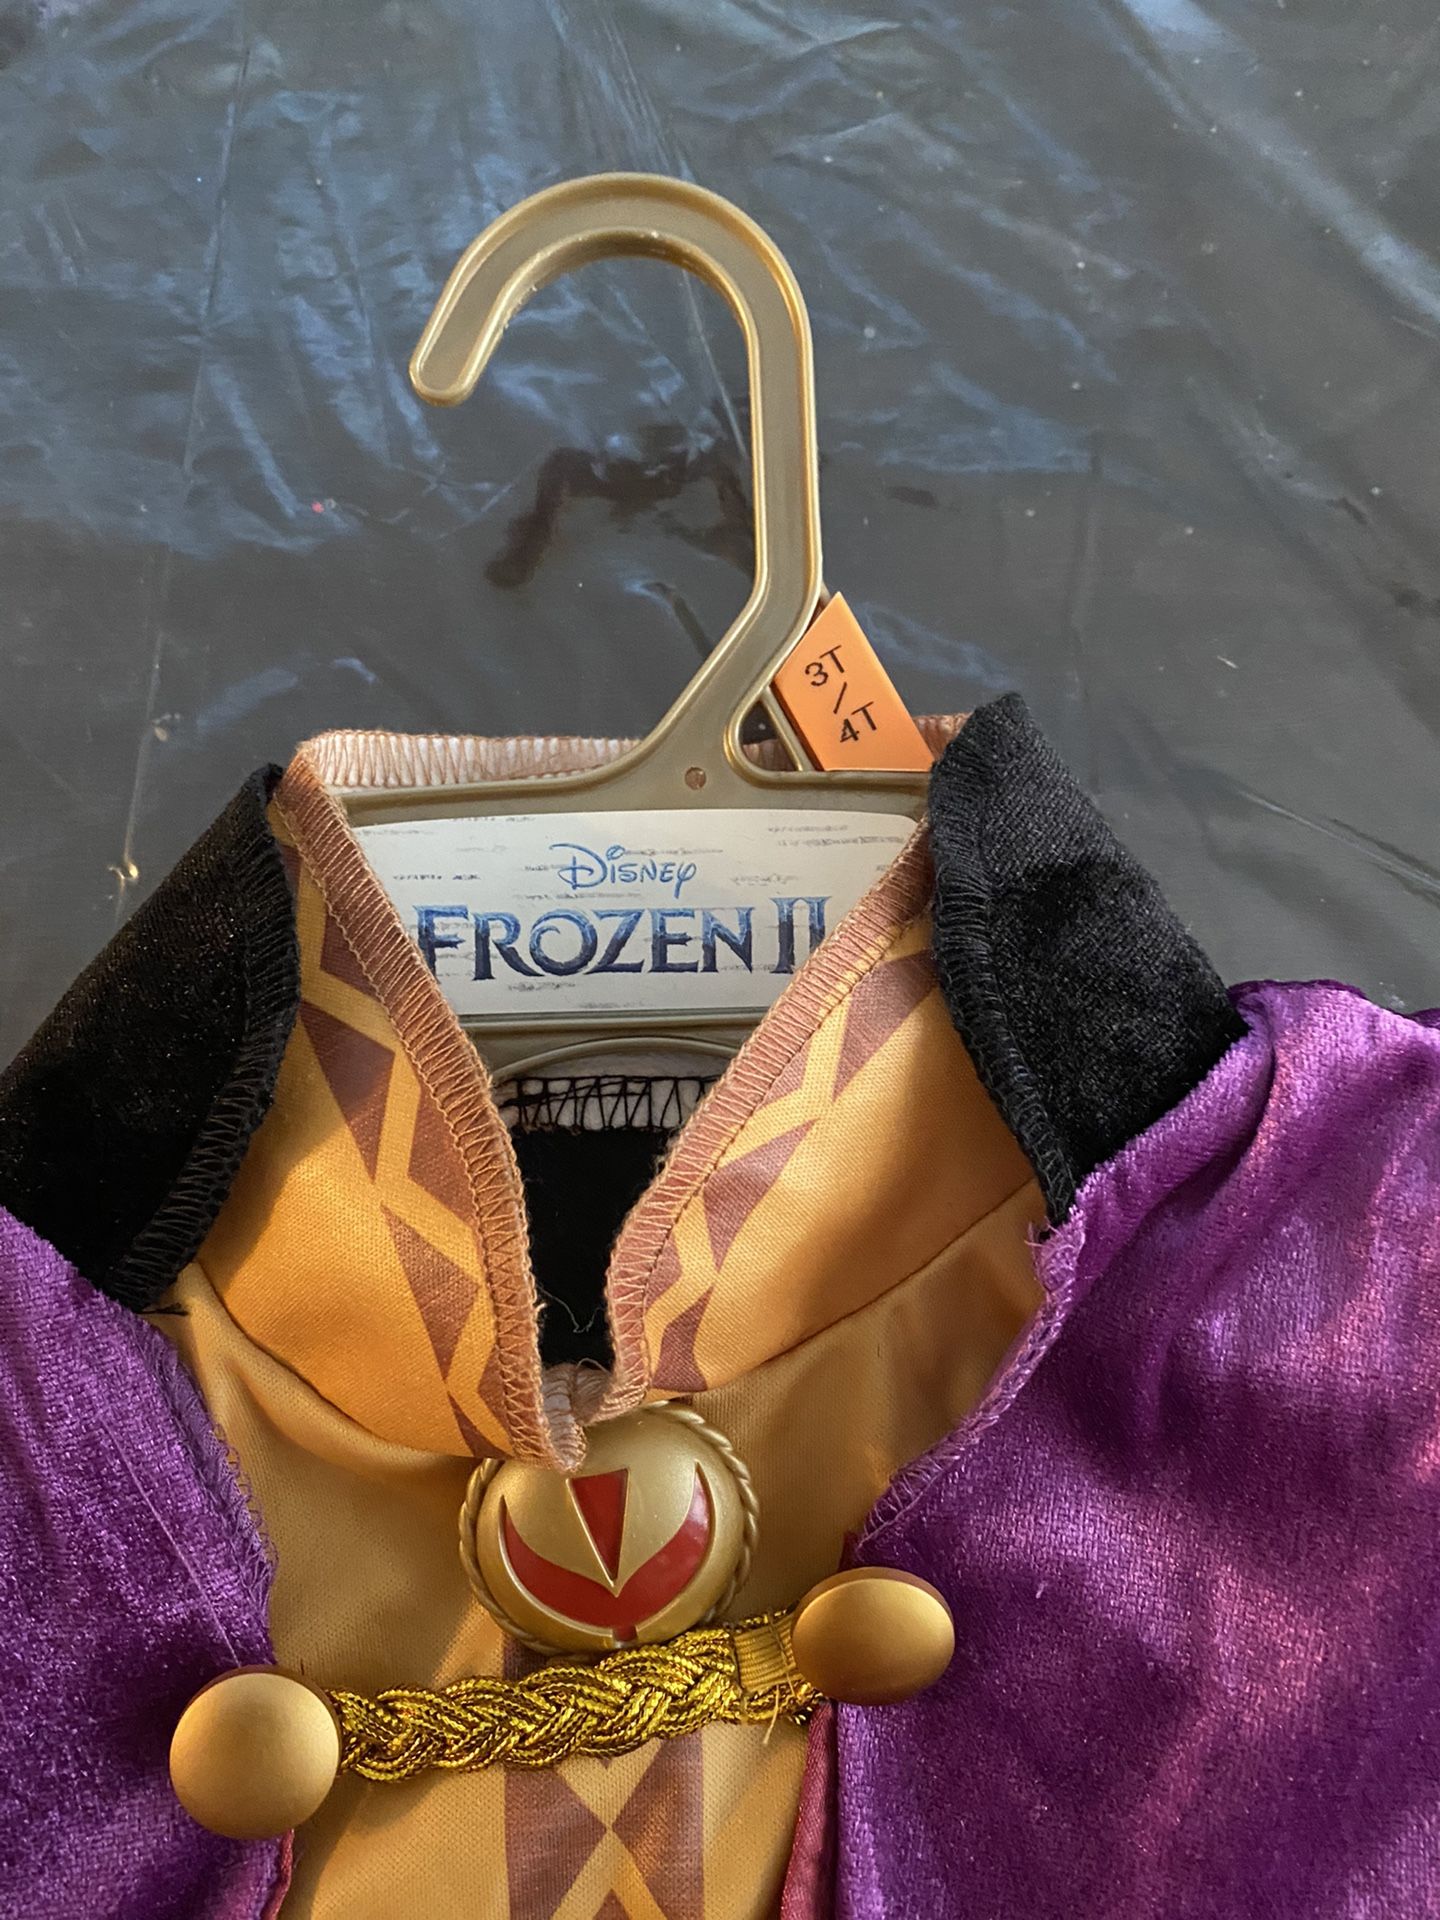 Disney Frozen II Costume. 3piece Set, Includes Hair Tie  Many Sizes Available.  